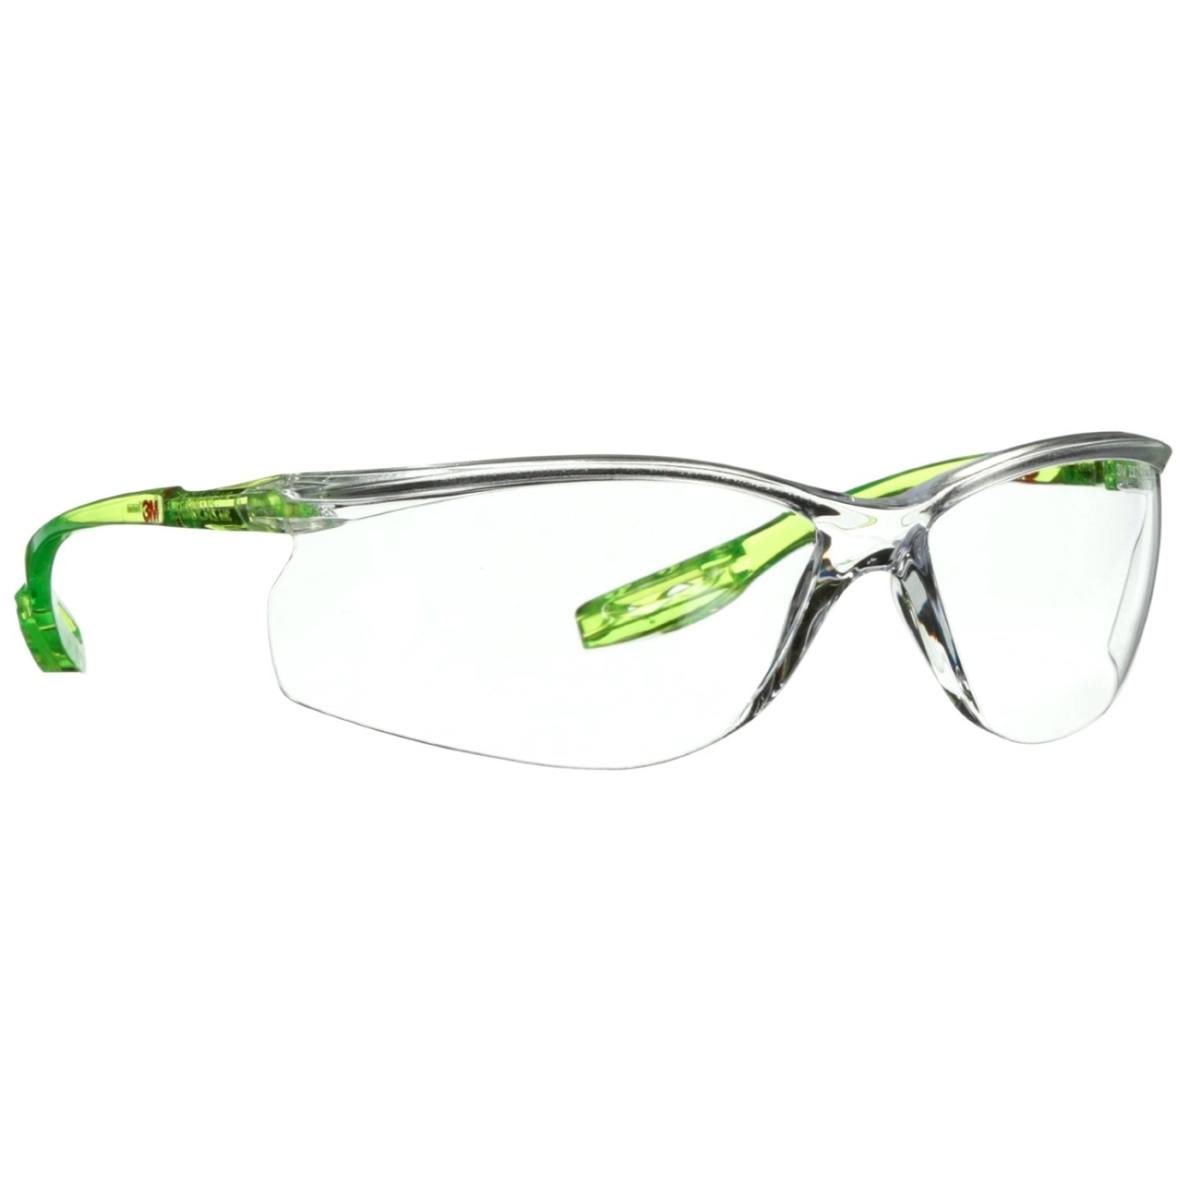 3M Solus safety spectacles CCS series, lime green temples, Scotchgard anti-fog/anti-scratch coating (K &amp; N), clear lenses, SCCS01SGAF-GRN-EU